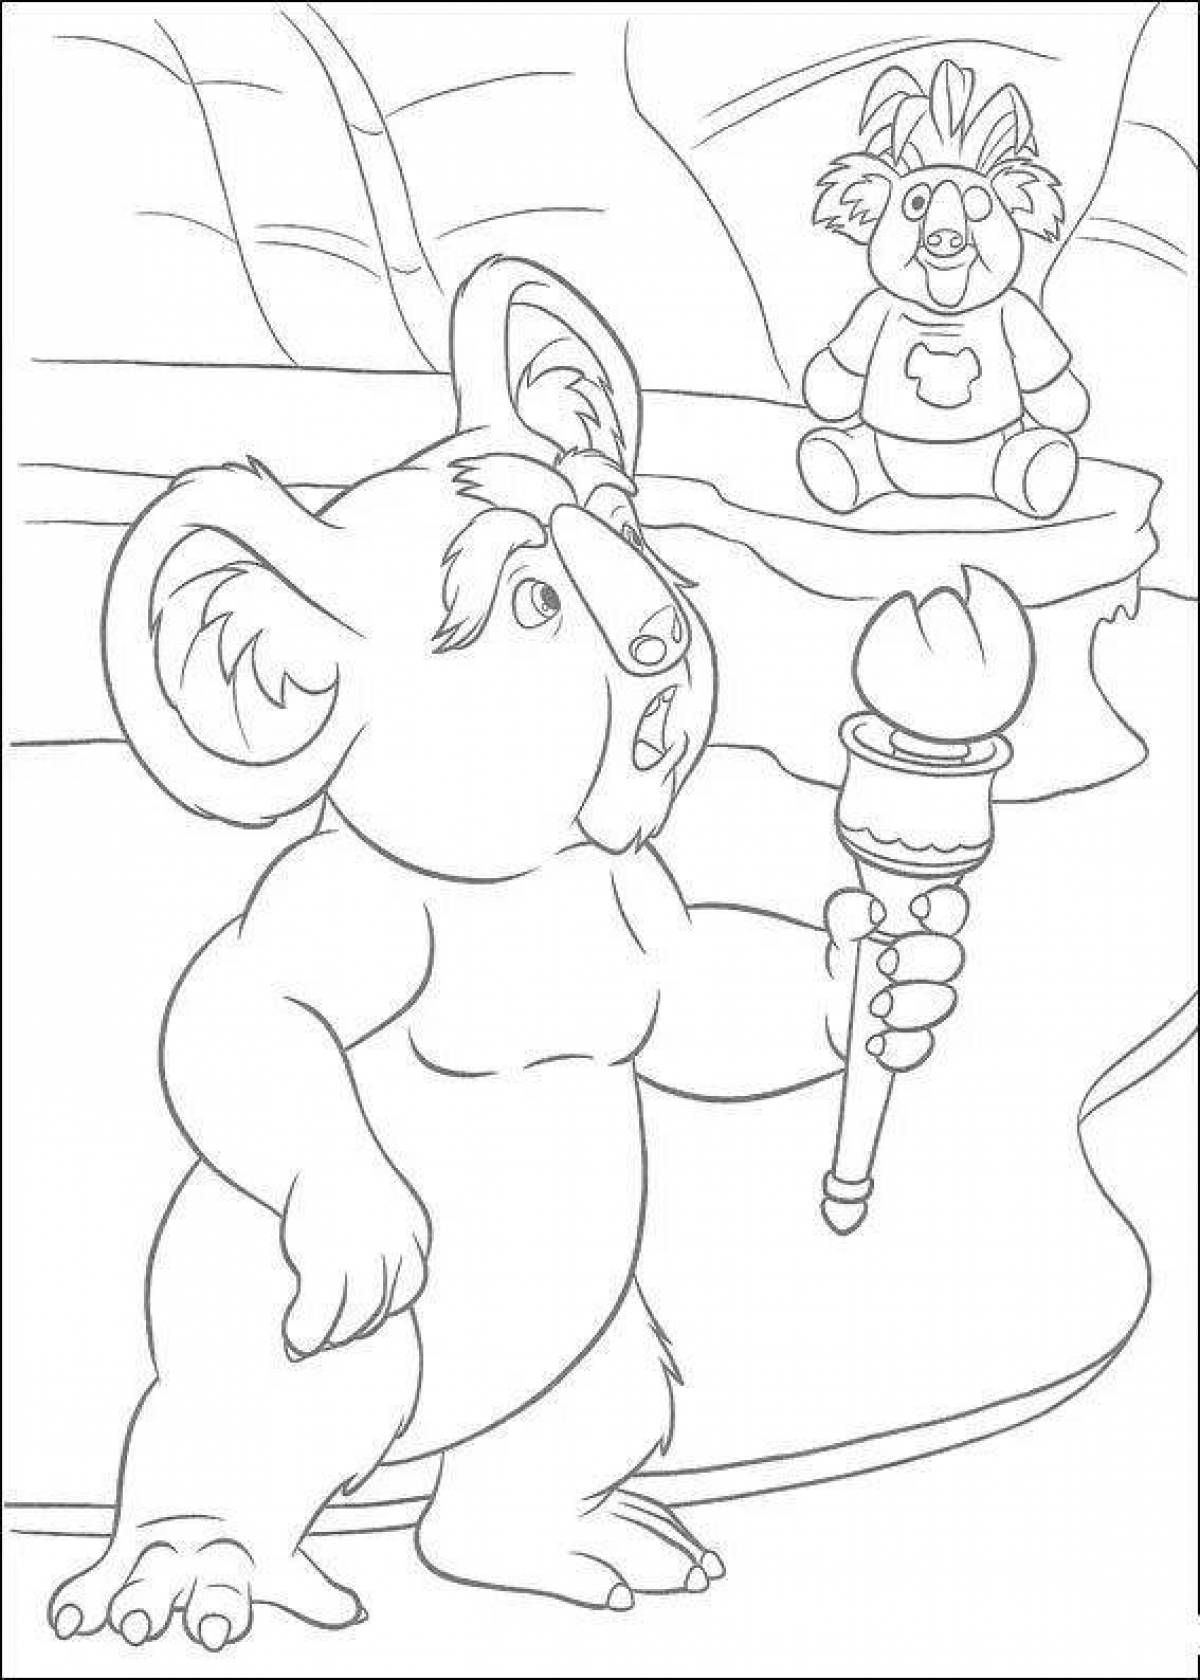 Dynamic Grand Adventure coloring page